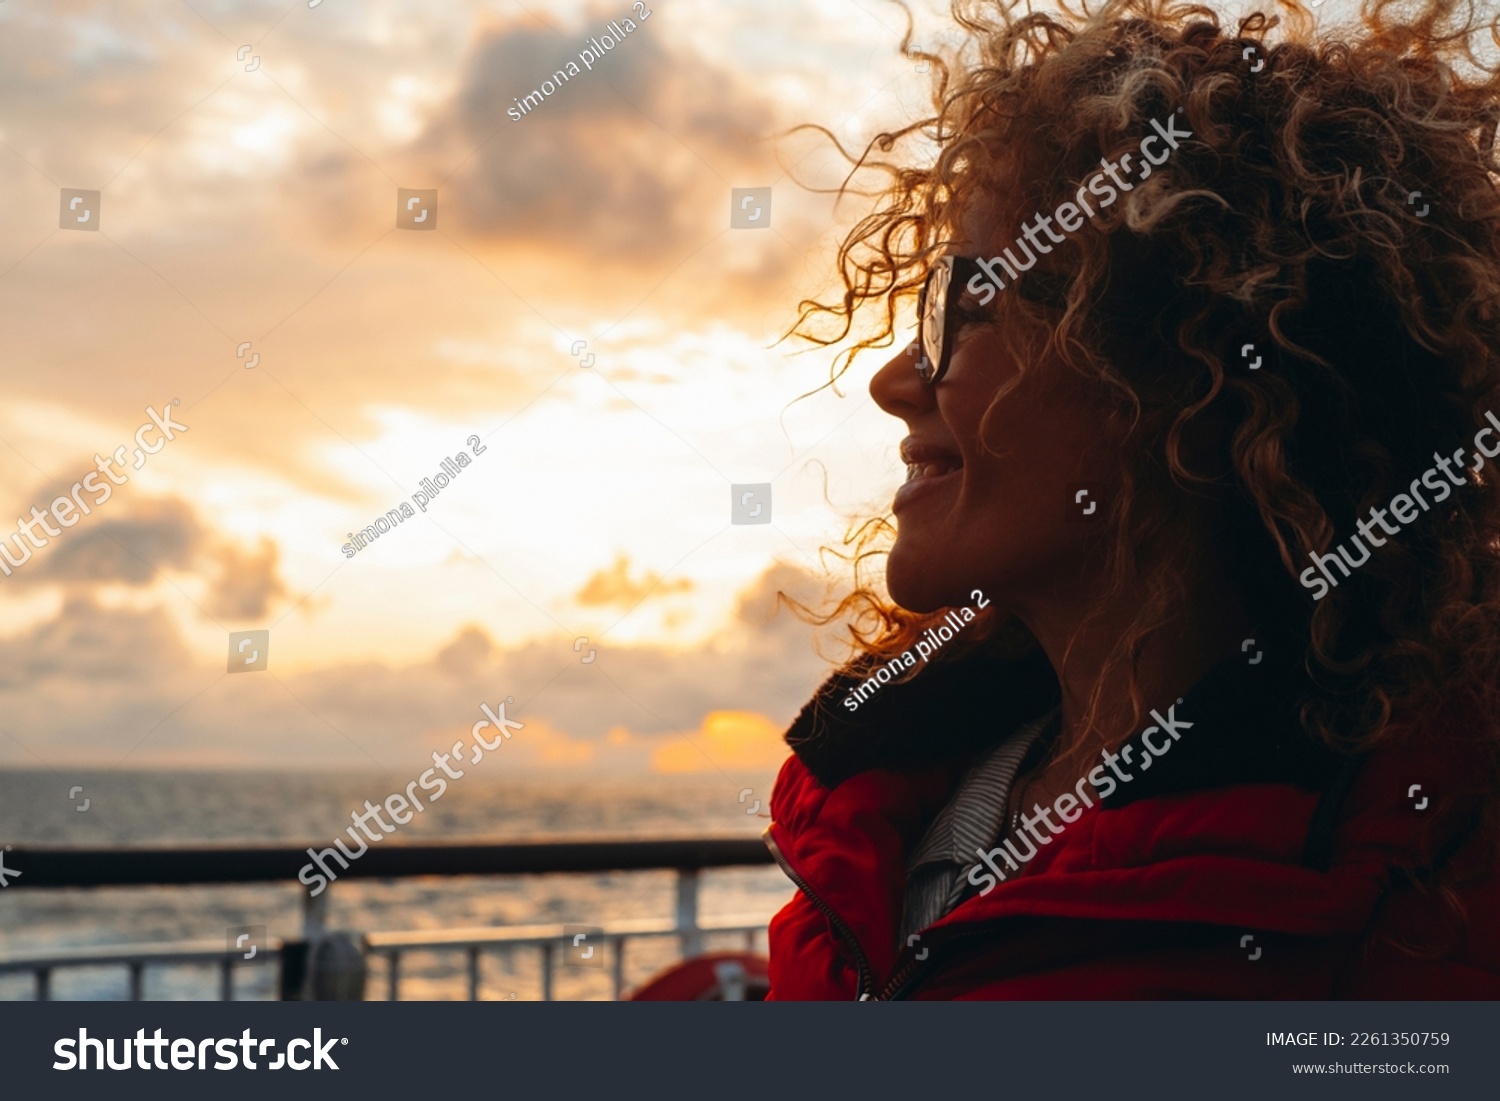 Travel and happiness expression side portrait concept. One woman smiling and enjoying freedom. Traveler tourist young lady with sunset and ocean in background. Ferry cruise boat ship transport. Sun #2261350759